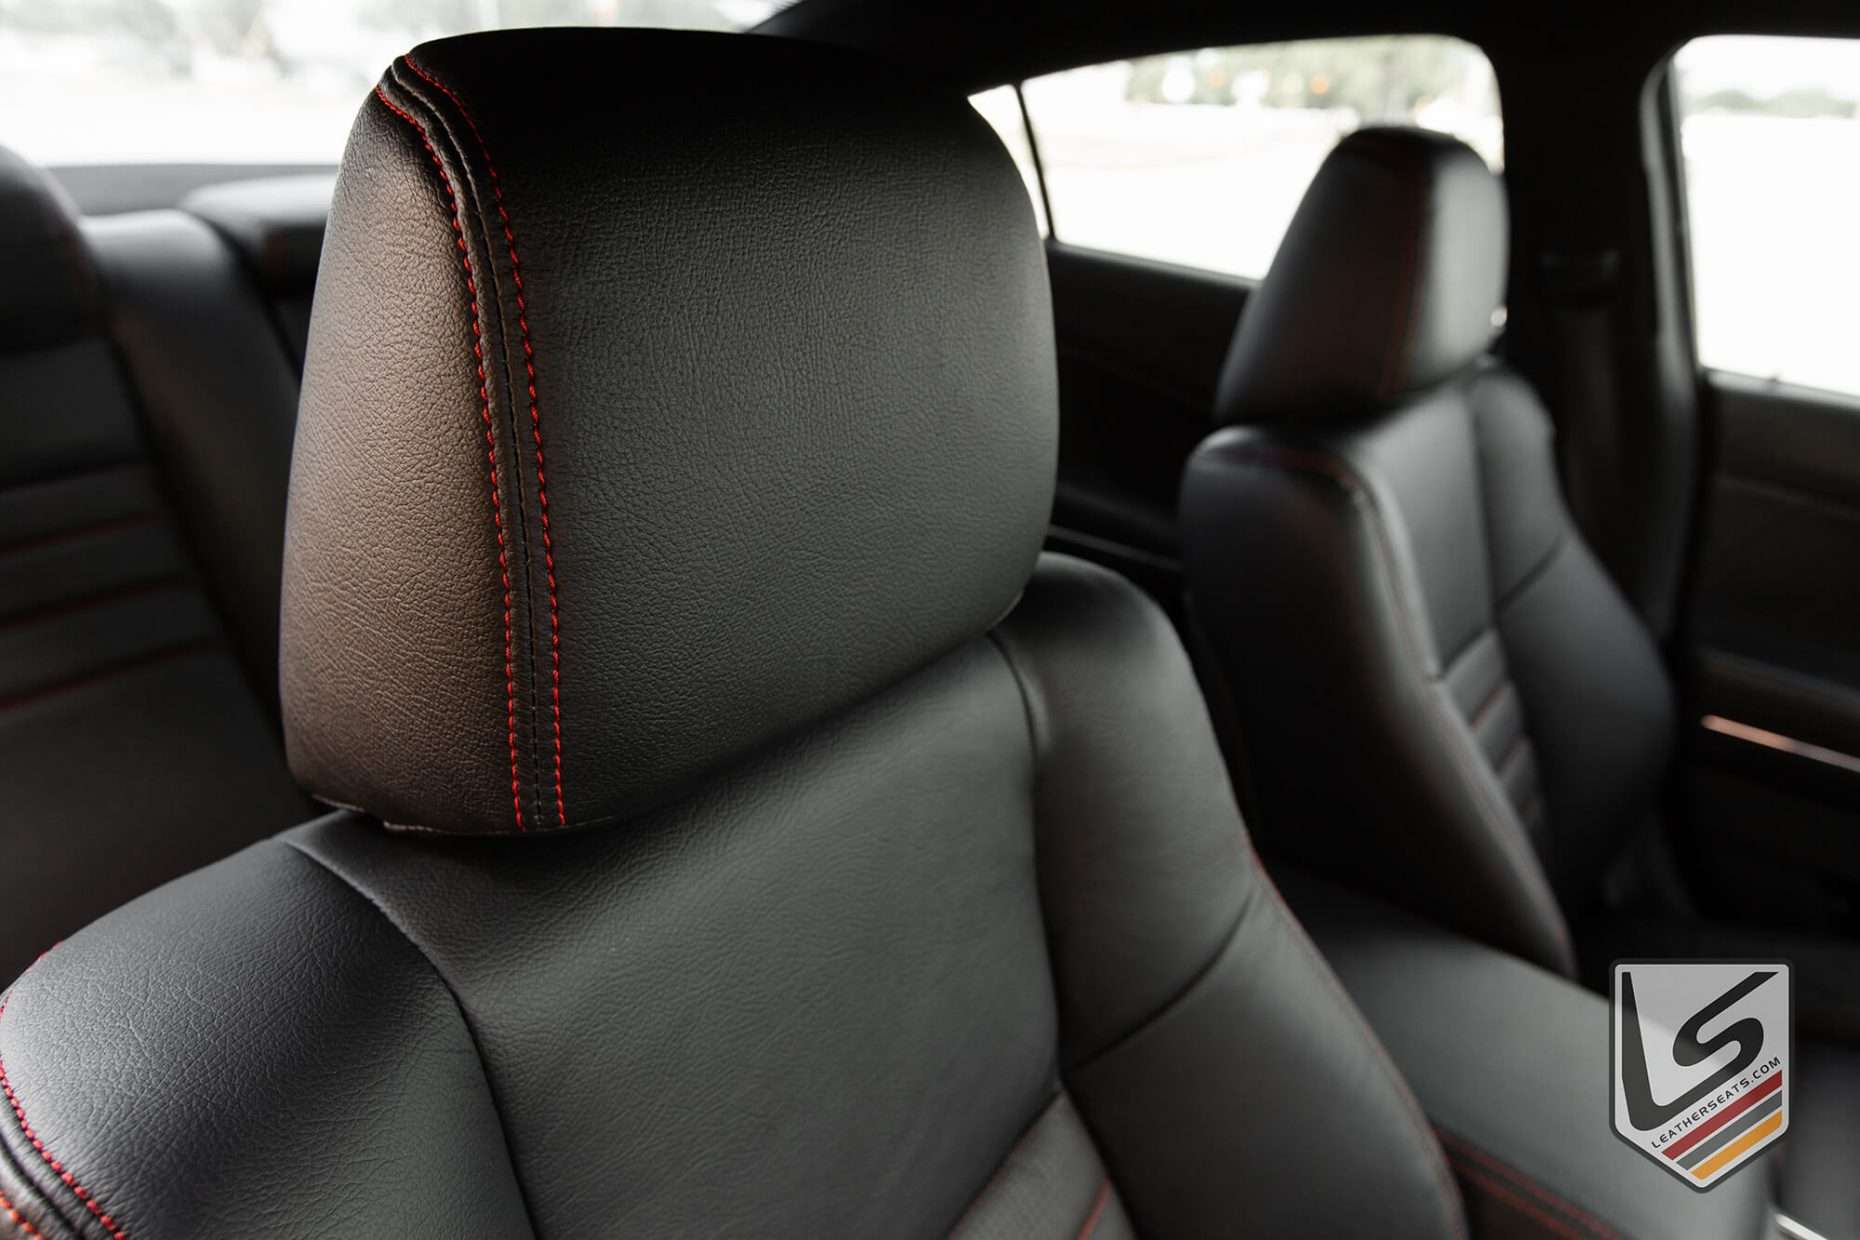 Headrest close-up with contrasting Red stitching